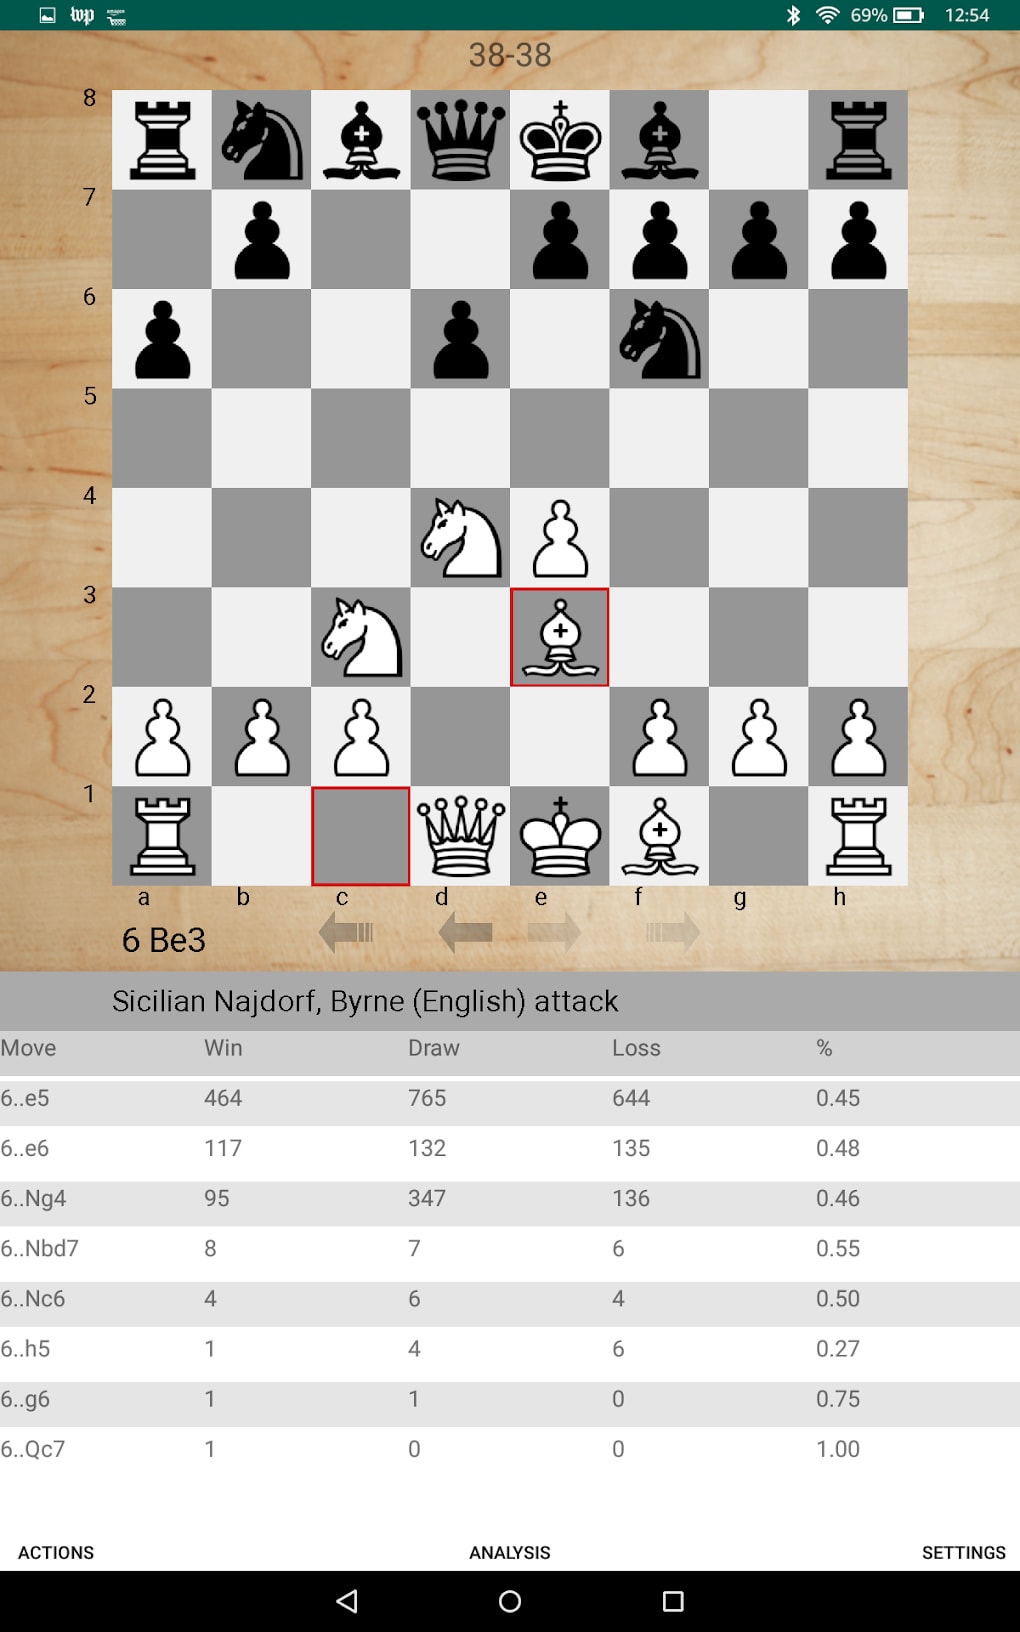 OpeningTree - Chess Openings – Apps on Google Play